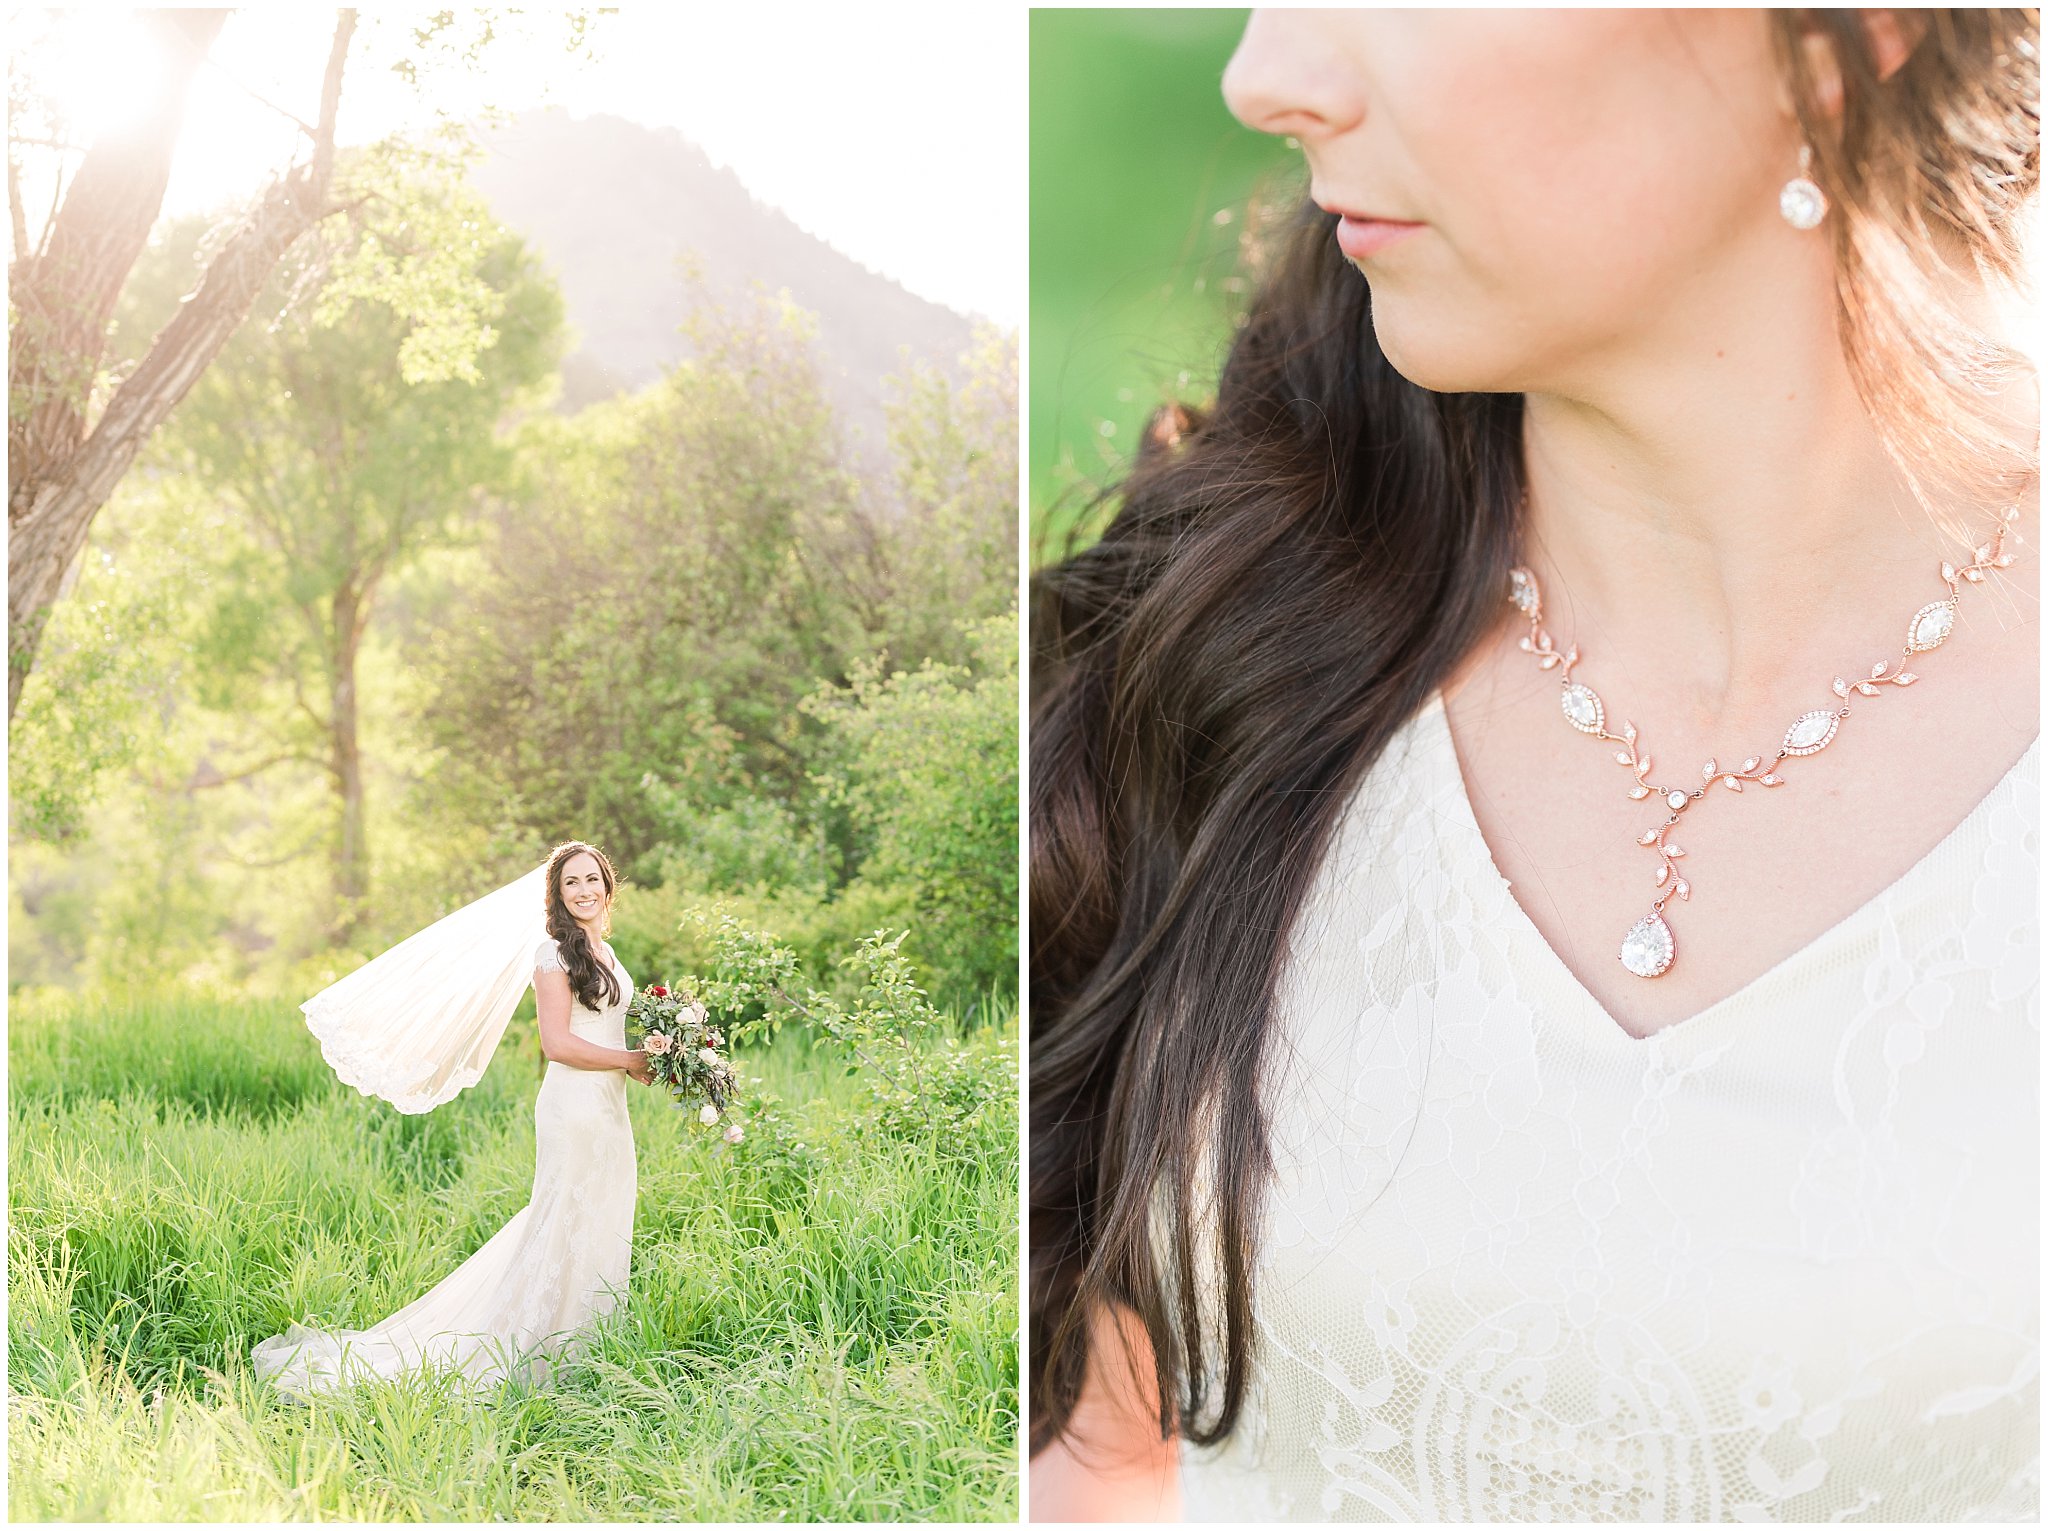 Bridal portraits during mountain wedding in Utah | Top Utah Wedding and Couples Photos 2019 | Jessie and Dallin Photography